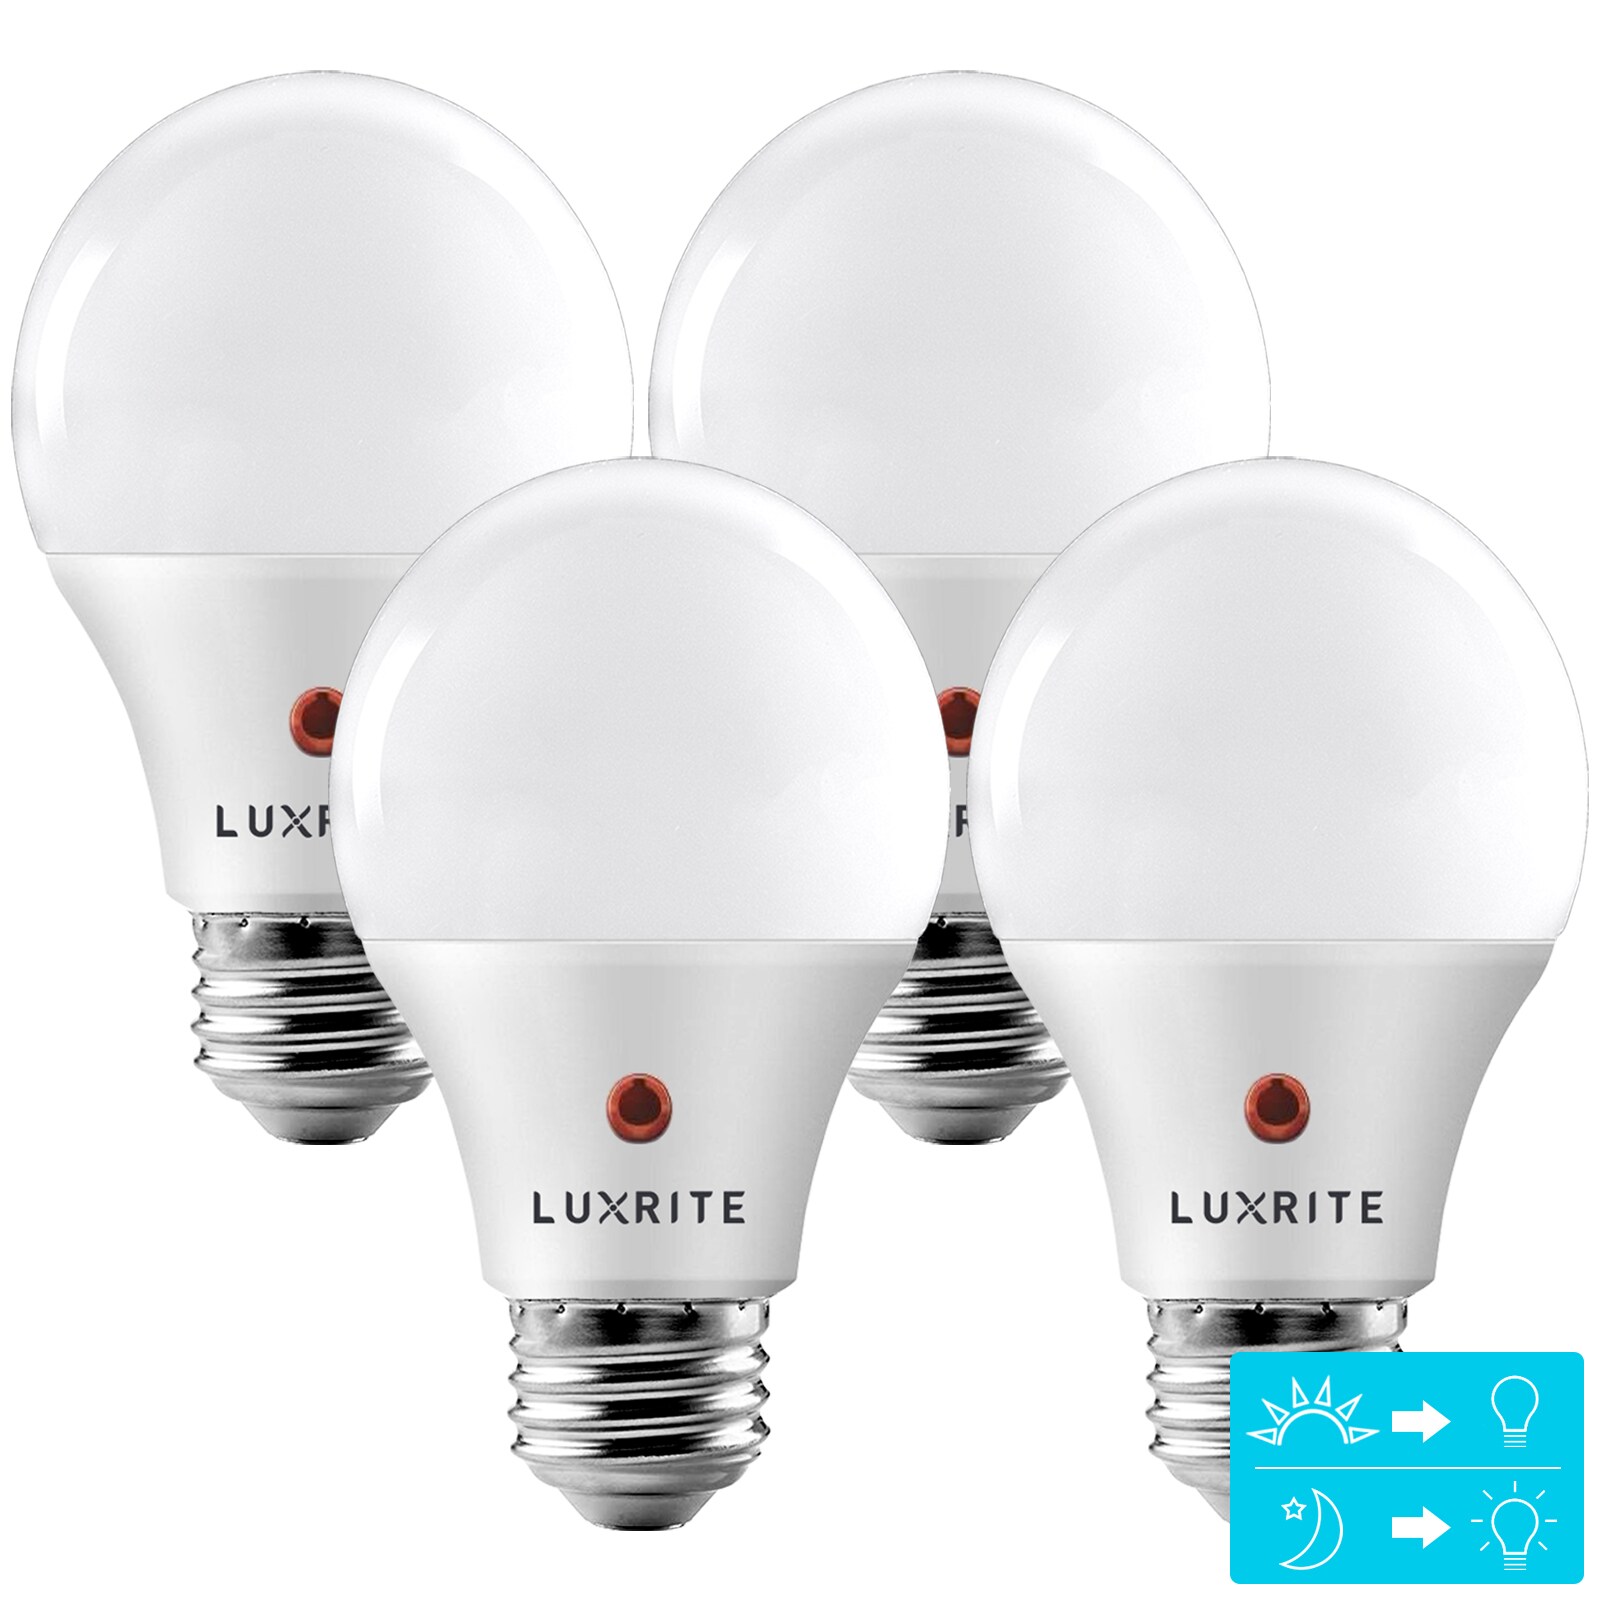 WHOLESALE PRICE 10x Portable Bulb Outdoor & Indoor Solar Powered LED Lightbulb 